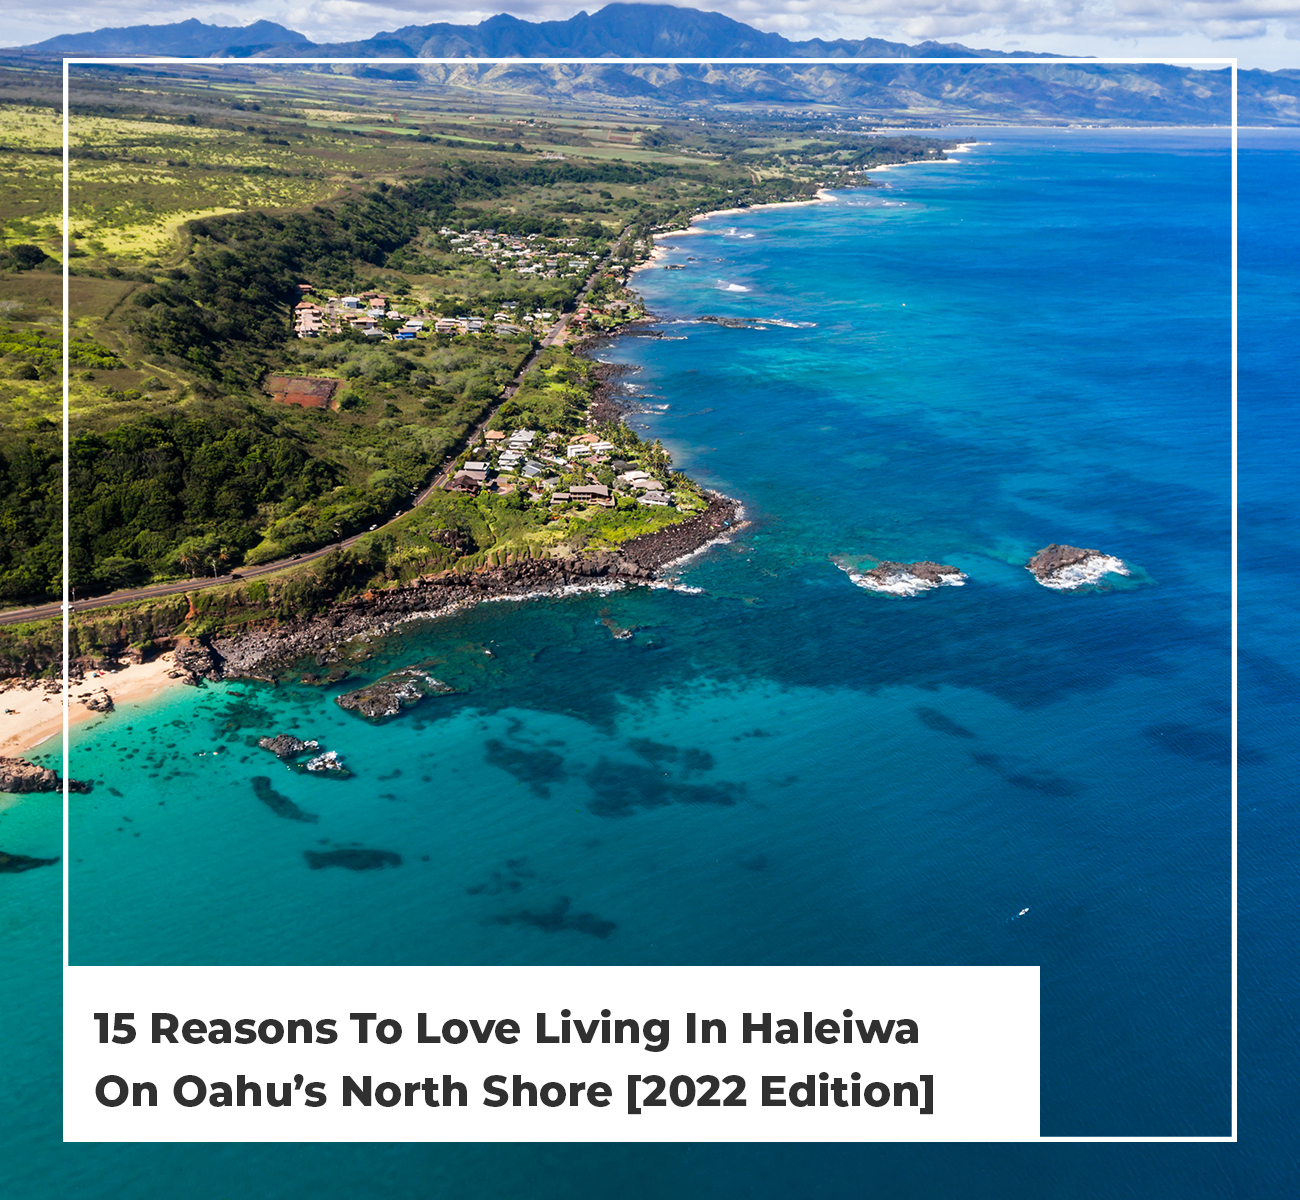 15 Reasons To Love Living In Haleiwa On Oahu's North Shore - Main Image